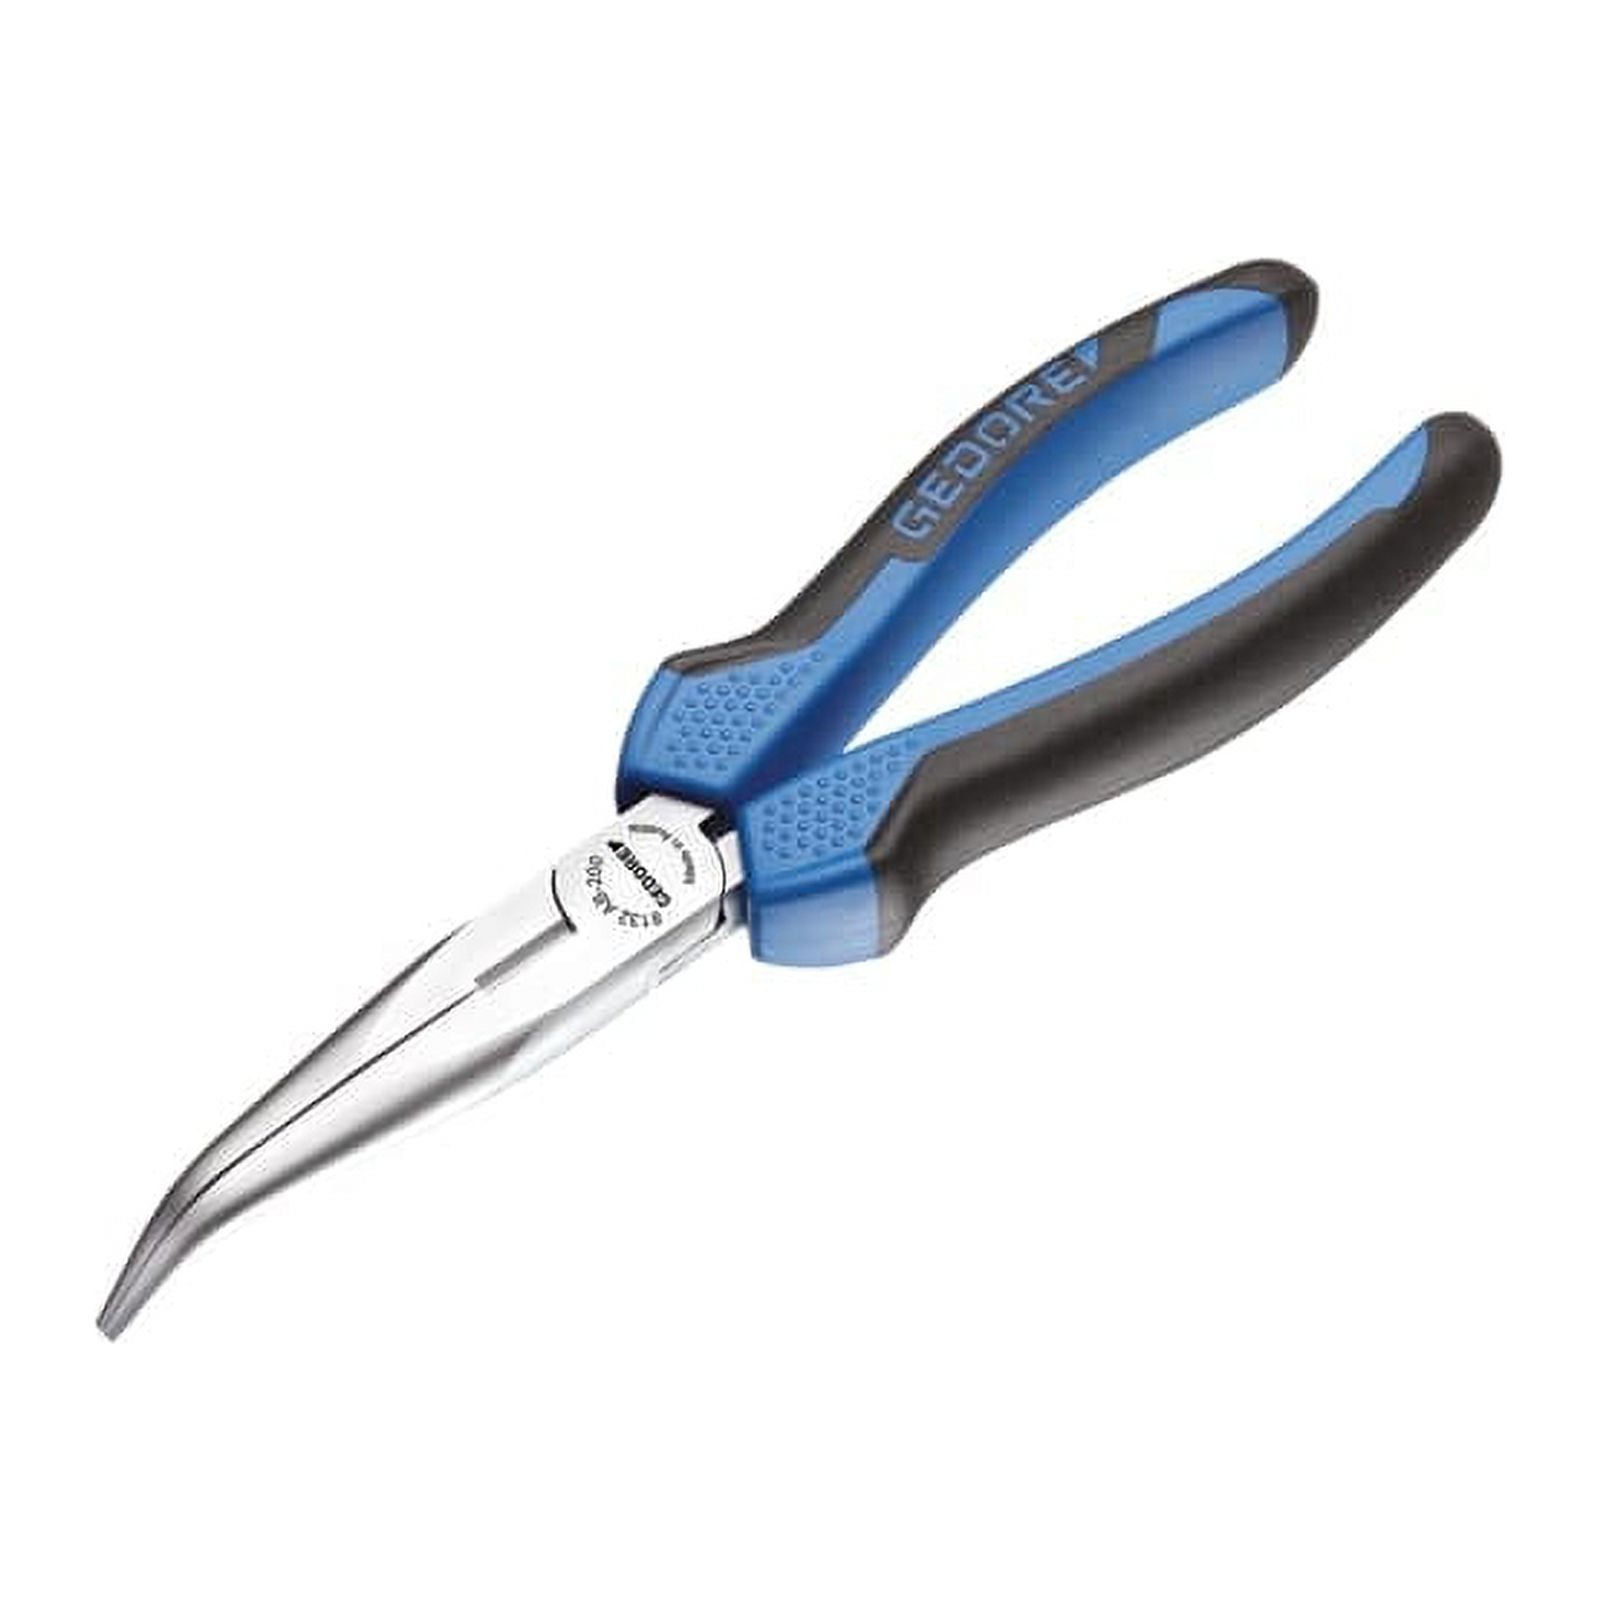 Gedore 6711180 8132 AB-160 TL Bent nose telephone pliers 160 mm